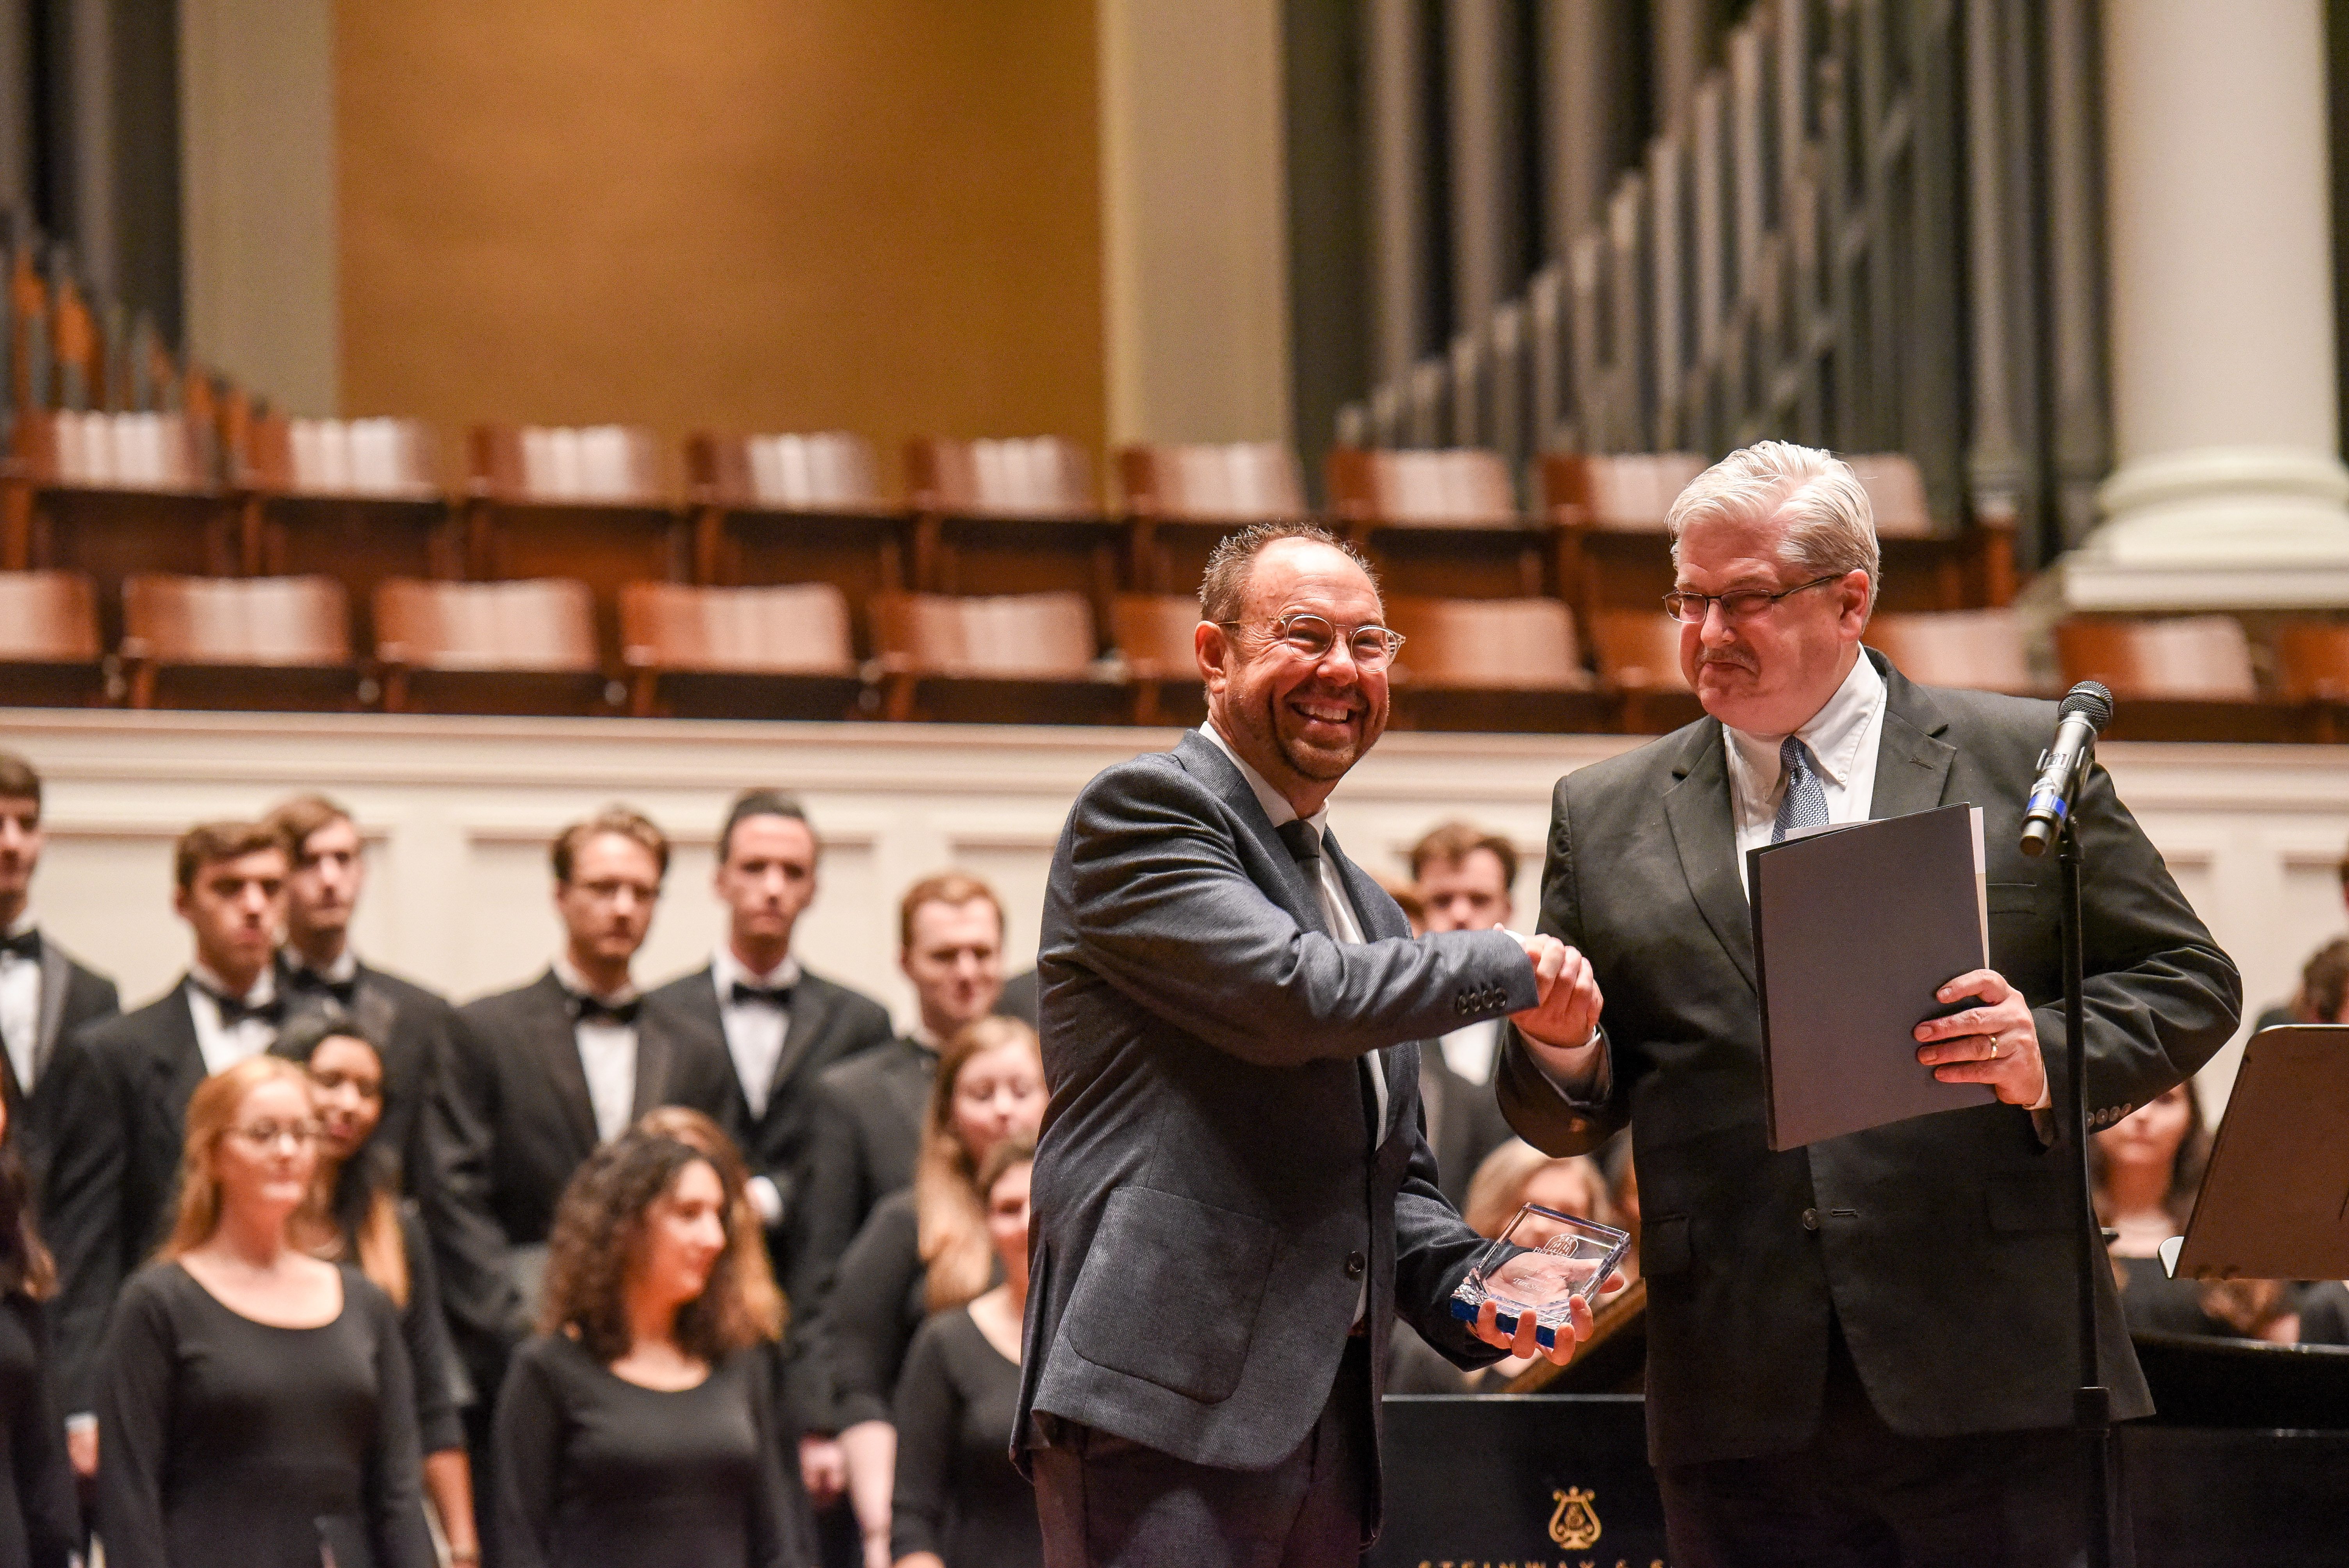 Sharp Receives his award from Dean of the College of Visual and Performing Arts Dr. Stephen Eaves on the stage of the McAfee Concert Hall.